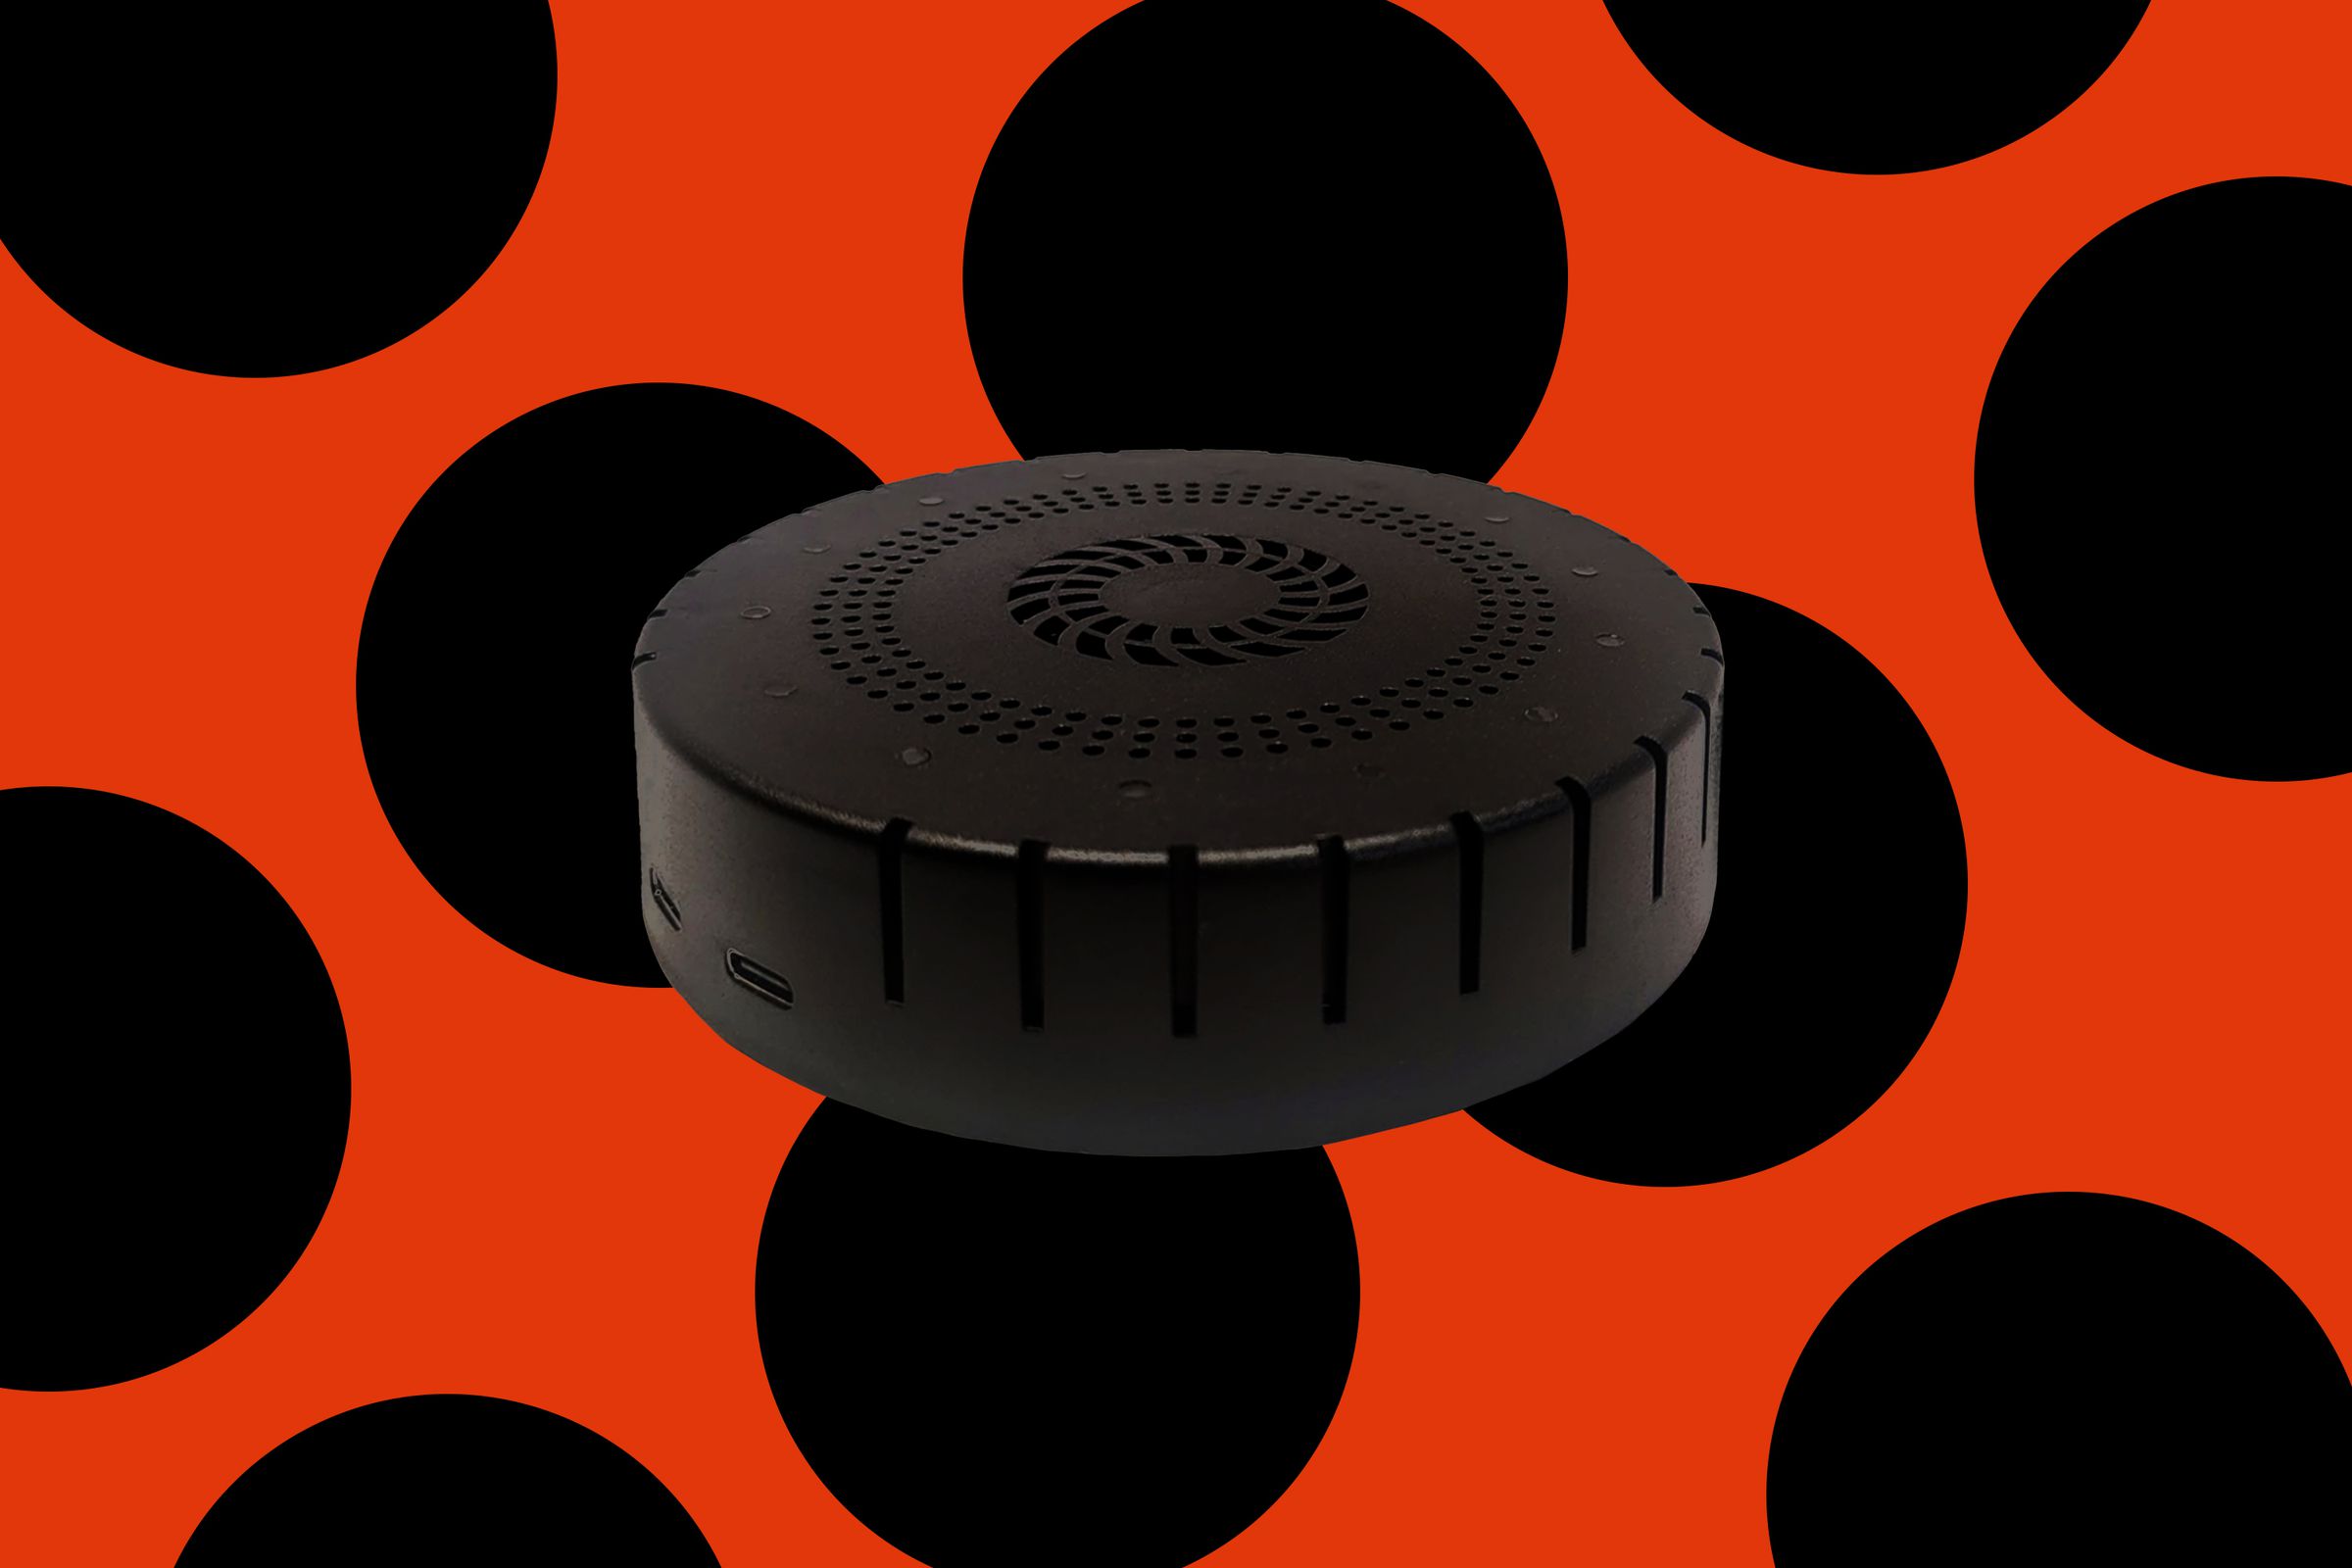 The WiFi Coconut is a router over a red background with black dots.